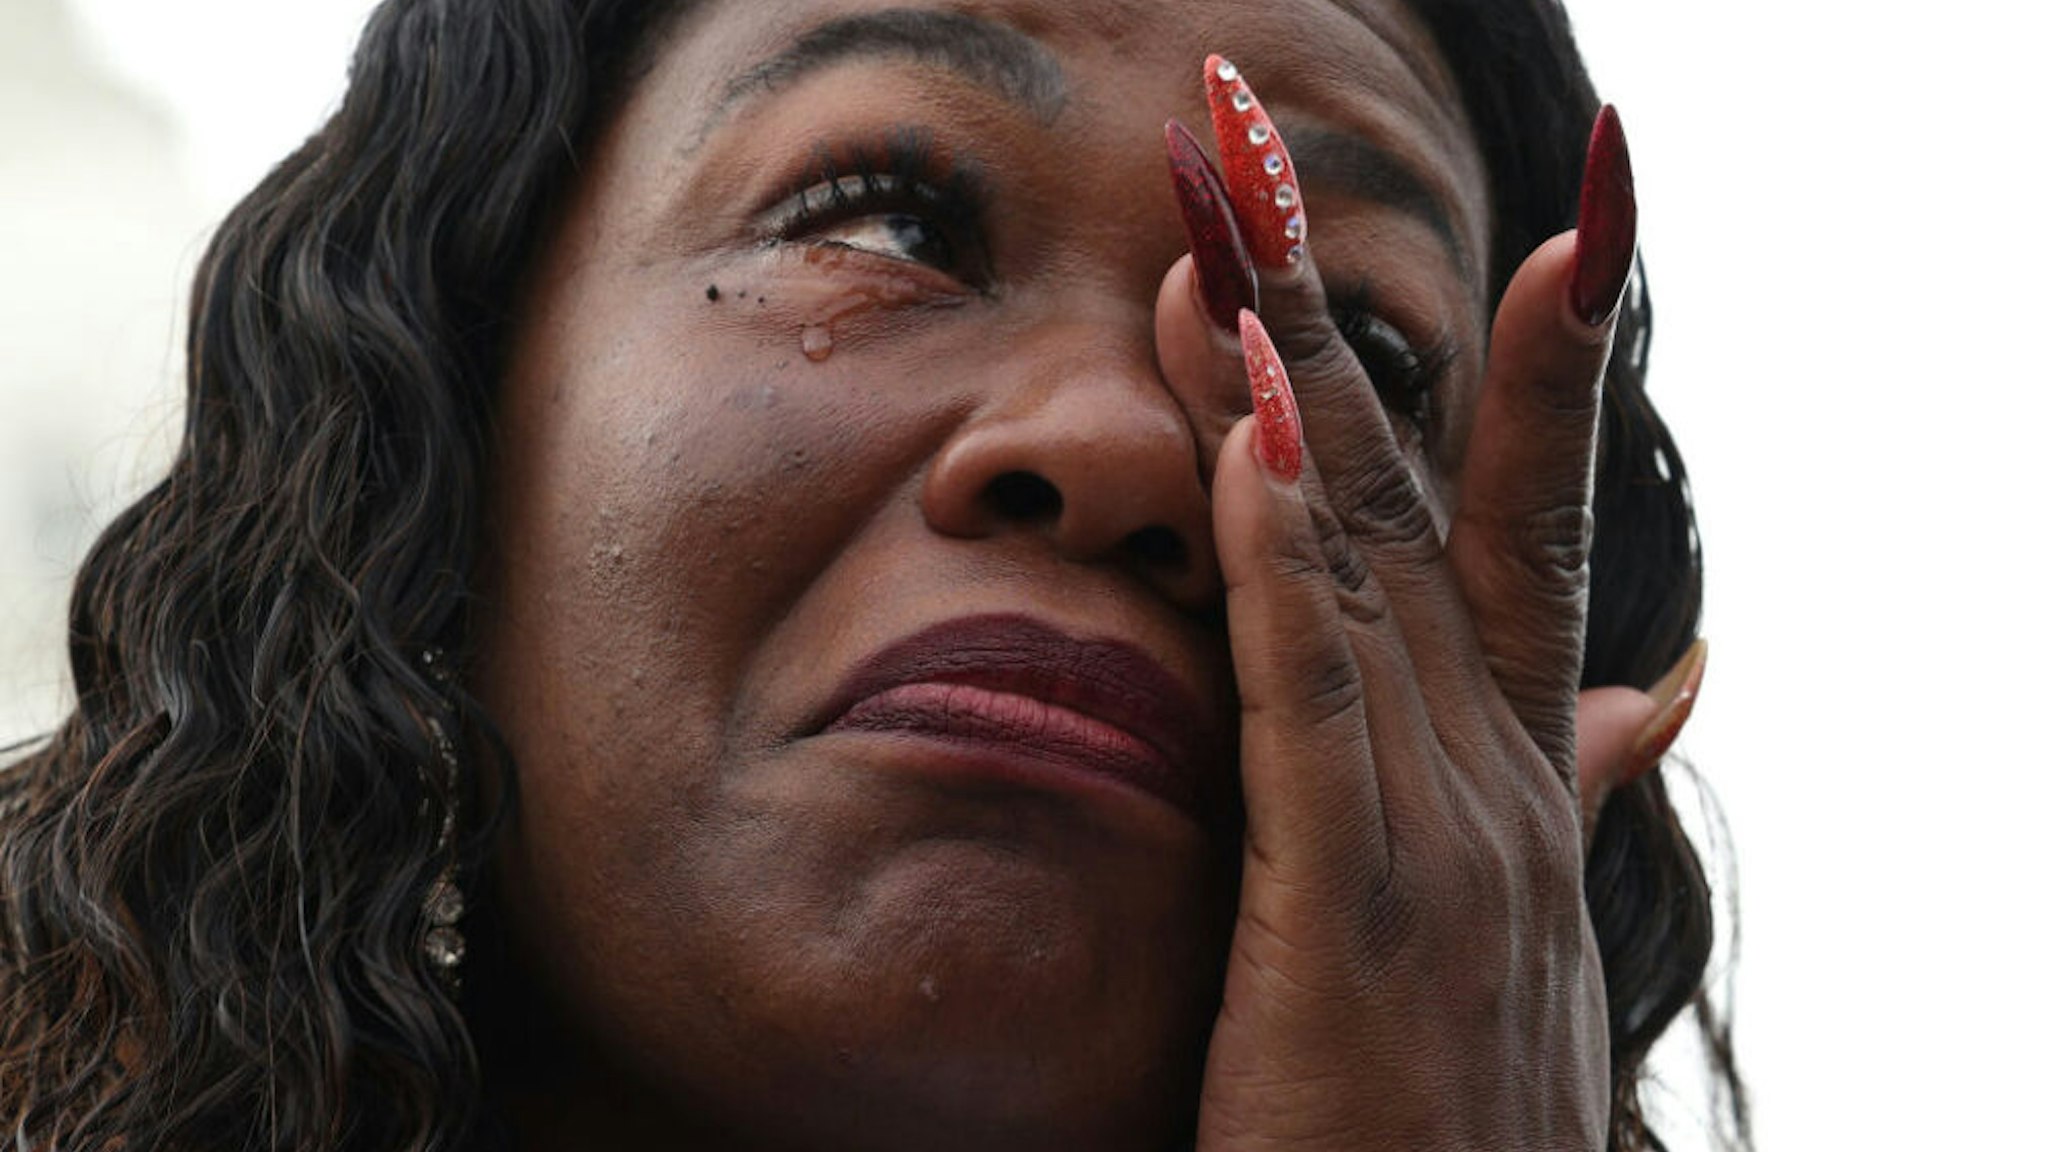 WASHINGTON, DC - AUGUST 03: U.S. Rep. Cori Bush (D-MO) becomes emotional during a news conference on the eviction moratorium at the Capitol on August 03, 2021 in Washington, DC. News organizations reported that the Biden Administration plans to institute a new eviction moratorium for areas with high levels of COVID-19, days after Bush started camping out on the steps of the Capitol Building to protest the end of the Centers for Disease Control and Prevention's original moratorium.